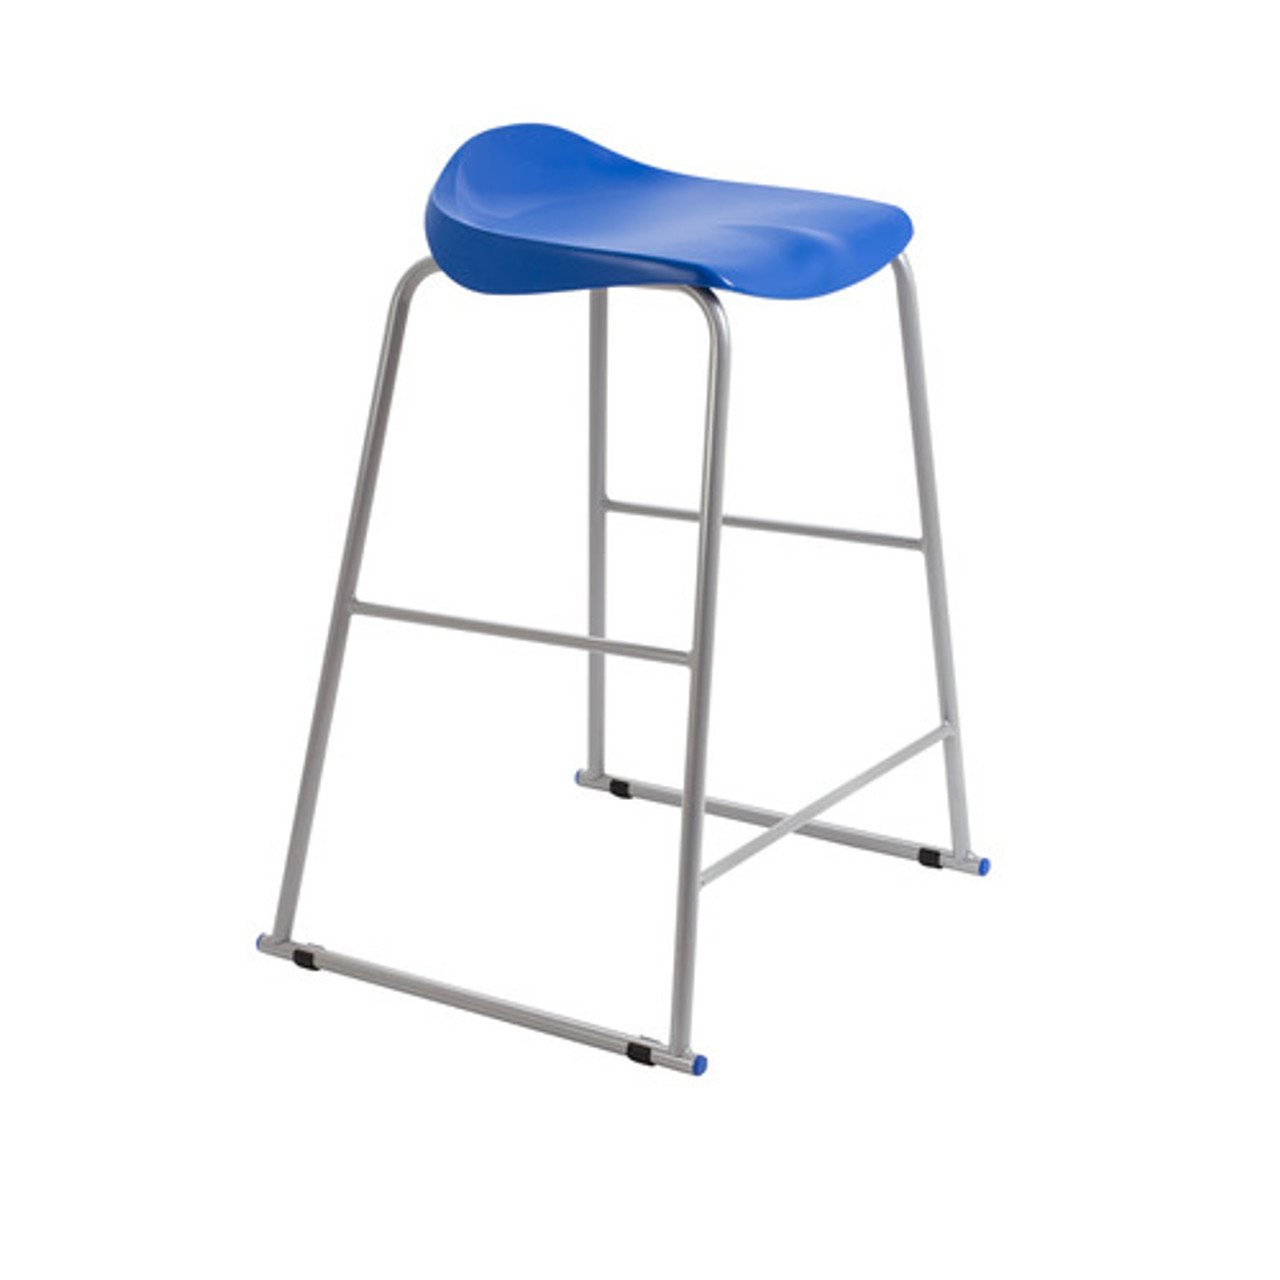 classroom stools to buy essex_stools for schools essex_high chairs essex_classroom stools essex